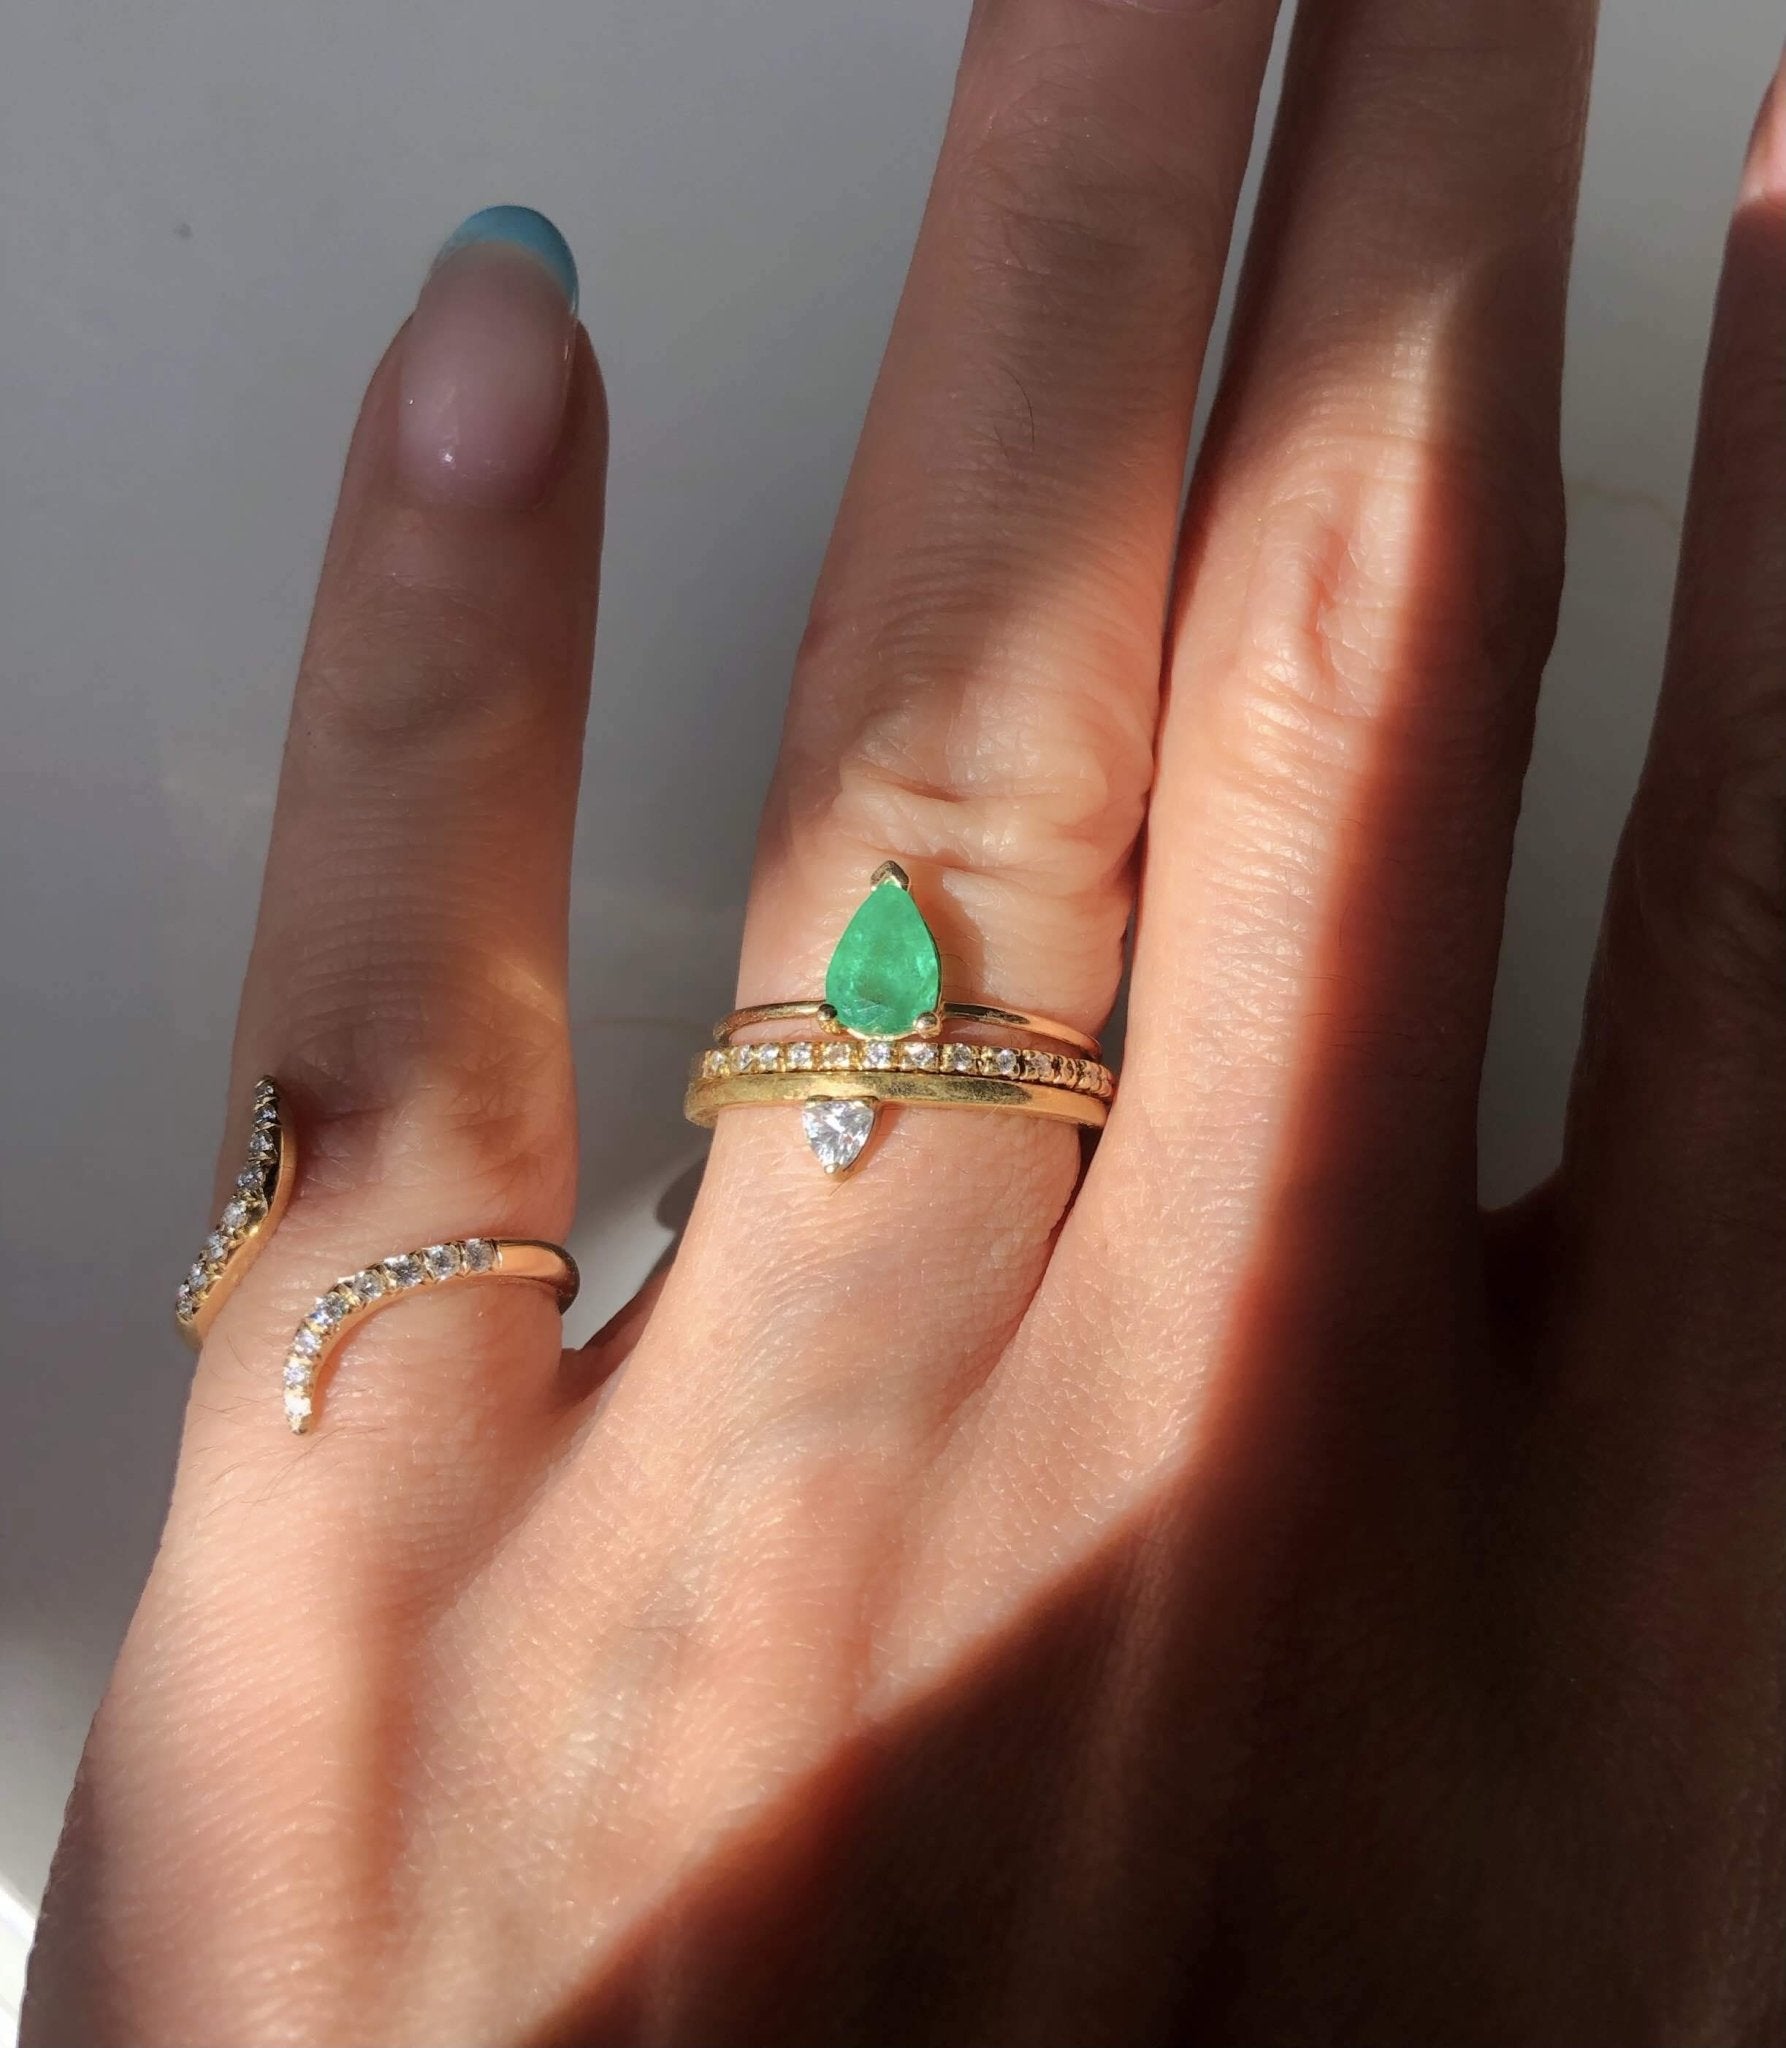 Venus - 14K Gold Pear Shaped Emerald Ring - Camille Jewelry